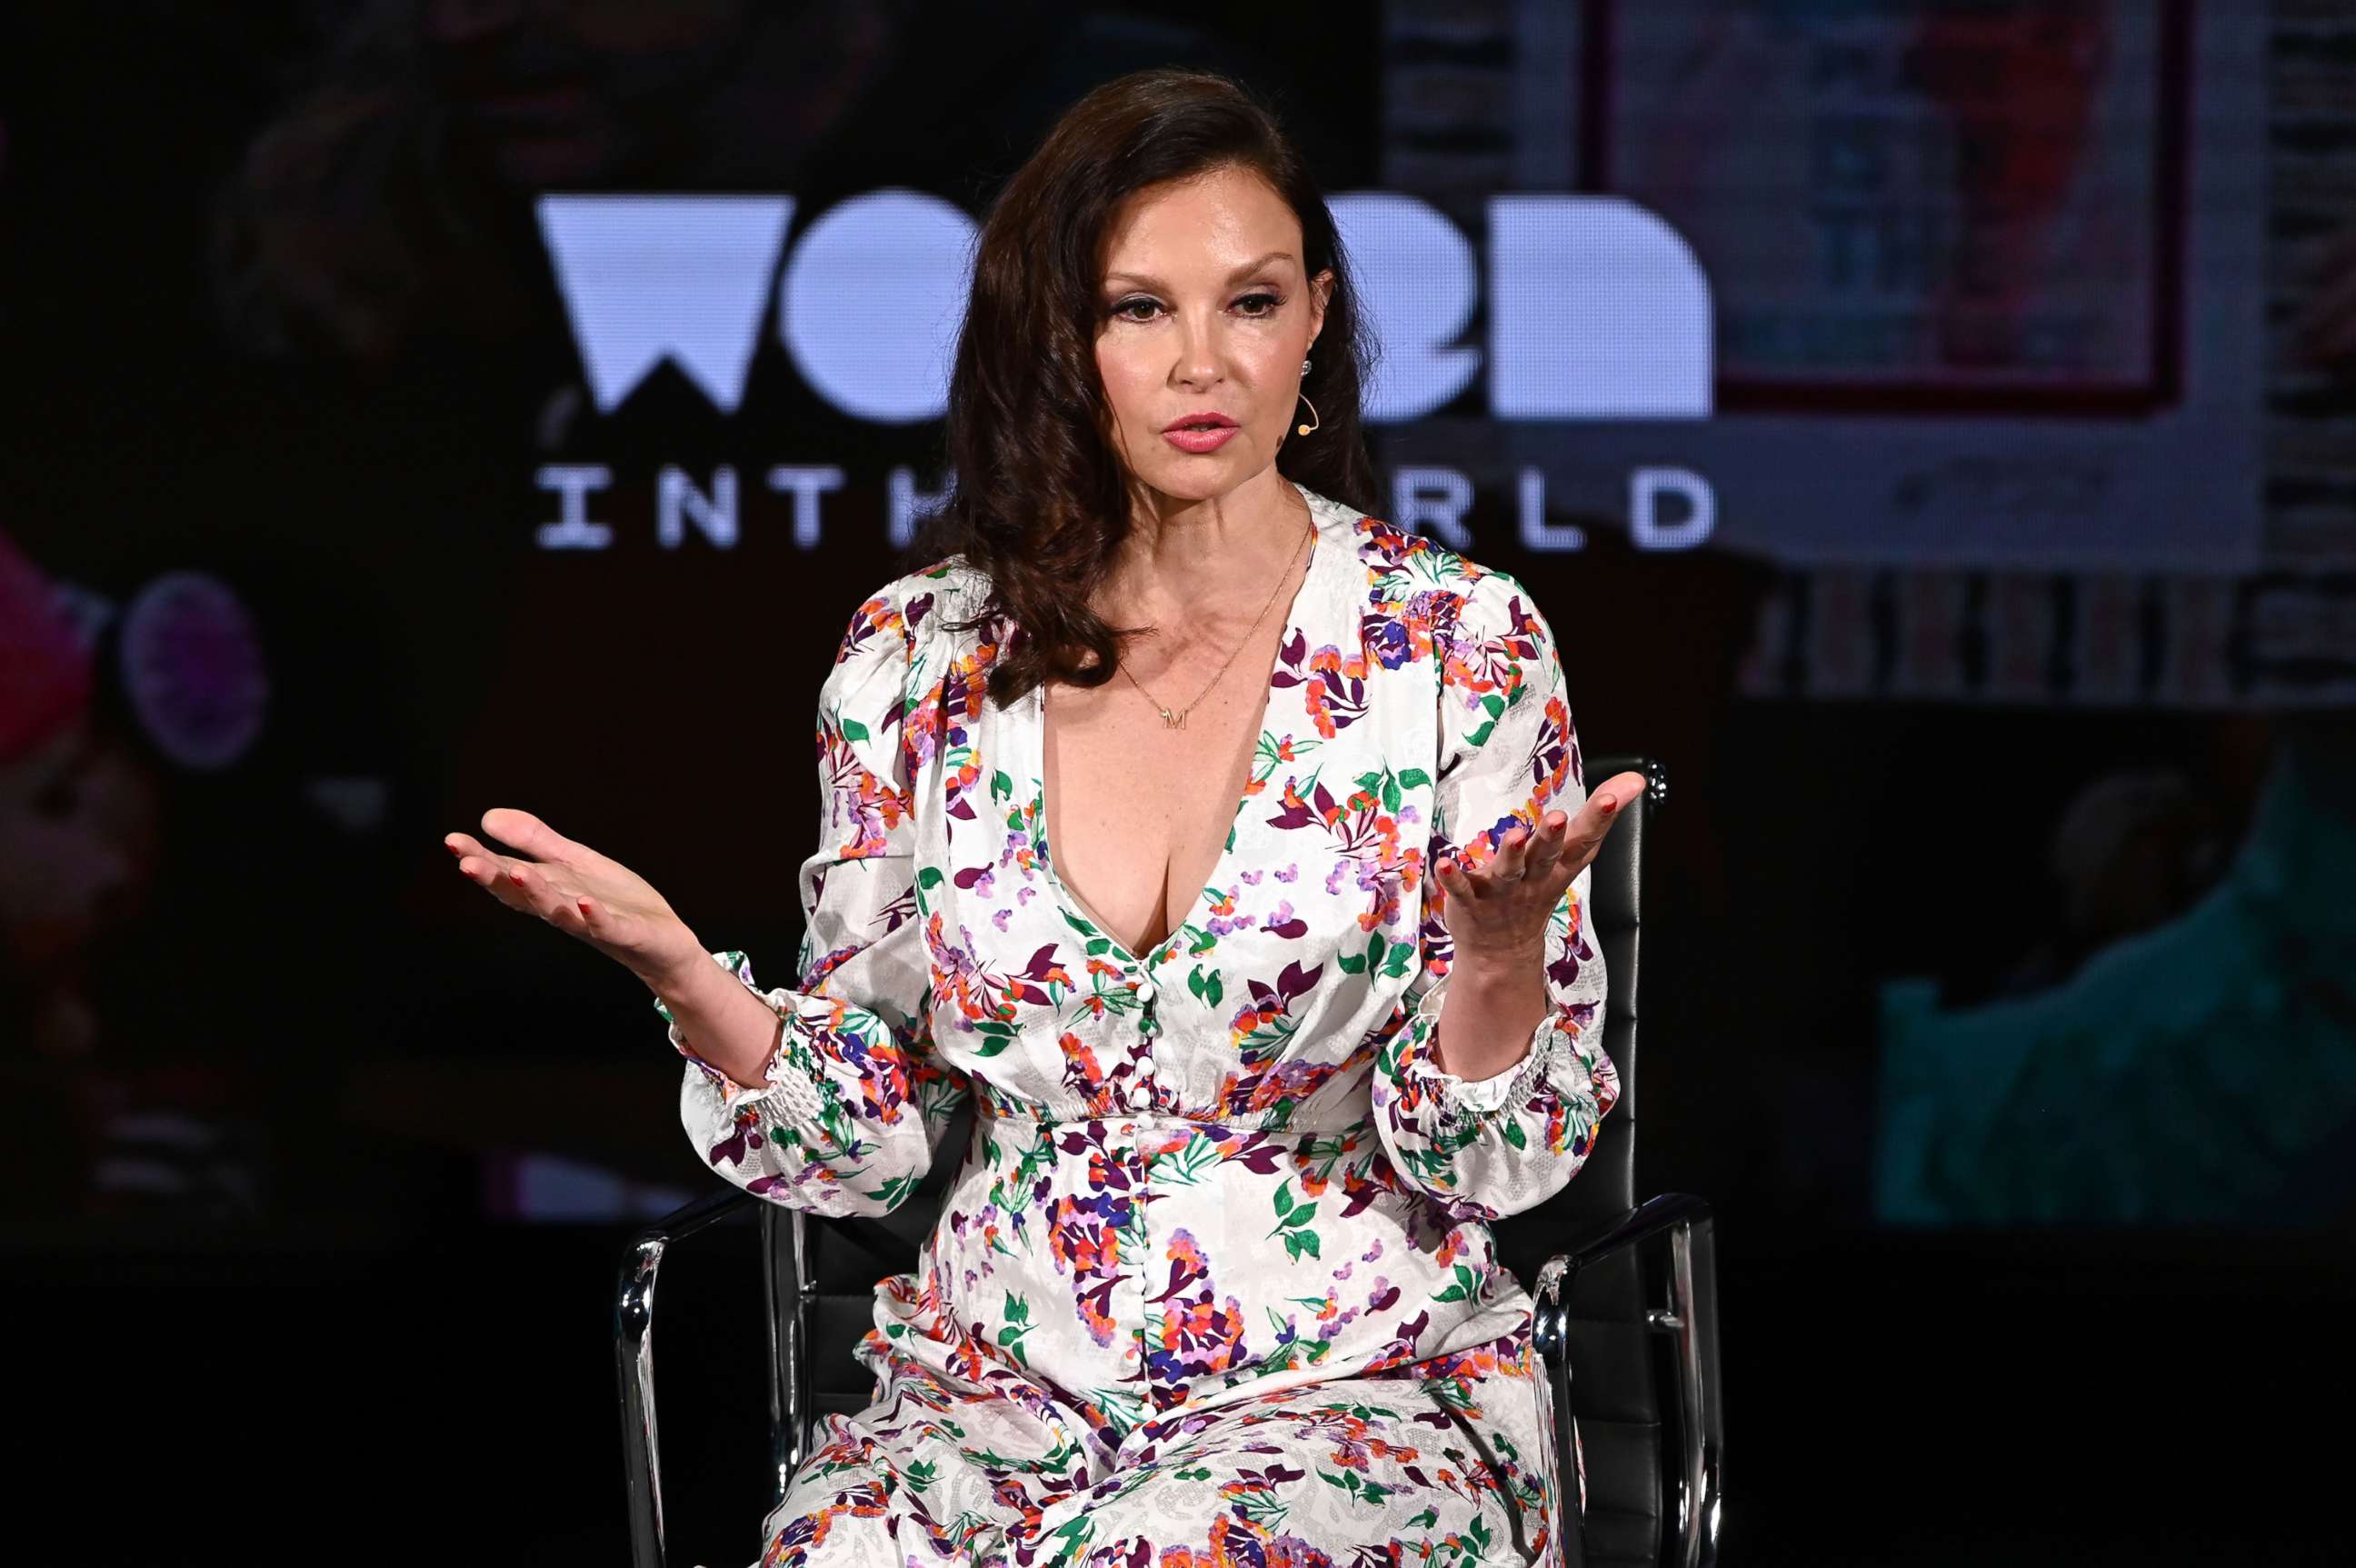 PHOTO: Ashley Judd speaks onstage at the 10th Anniversary Women In The World Summit in New York, April 11, 2019.